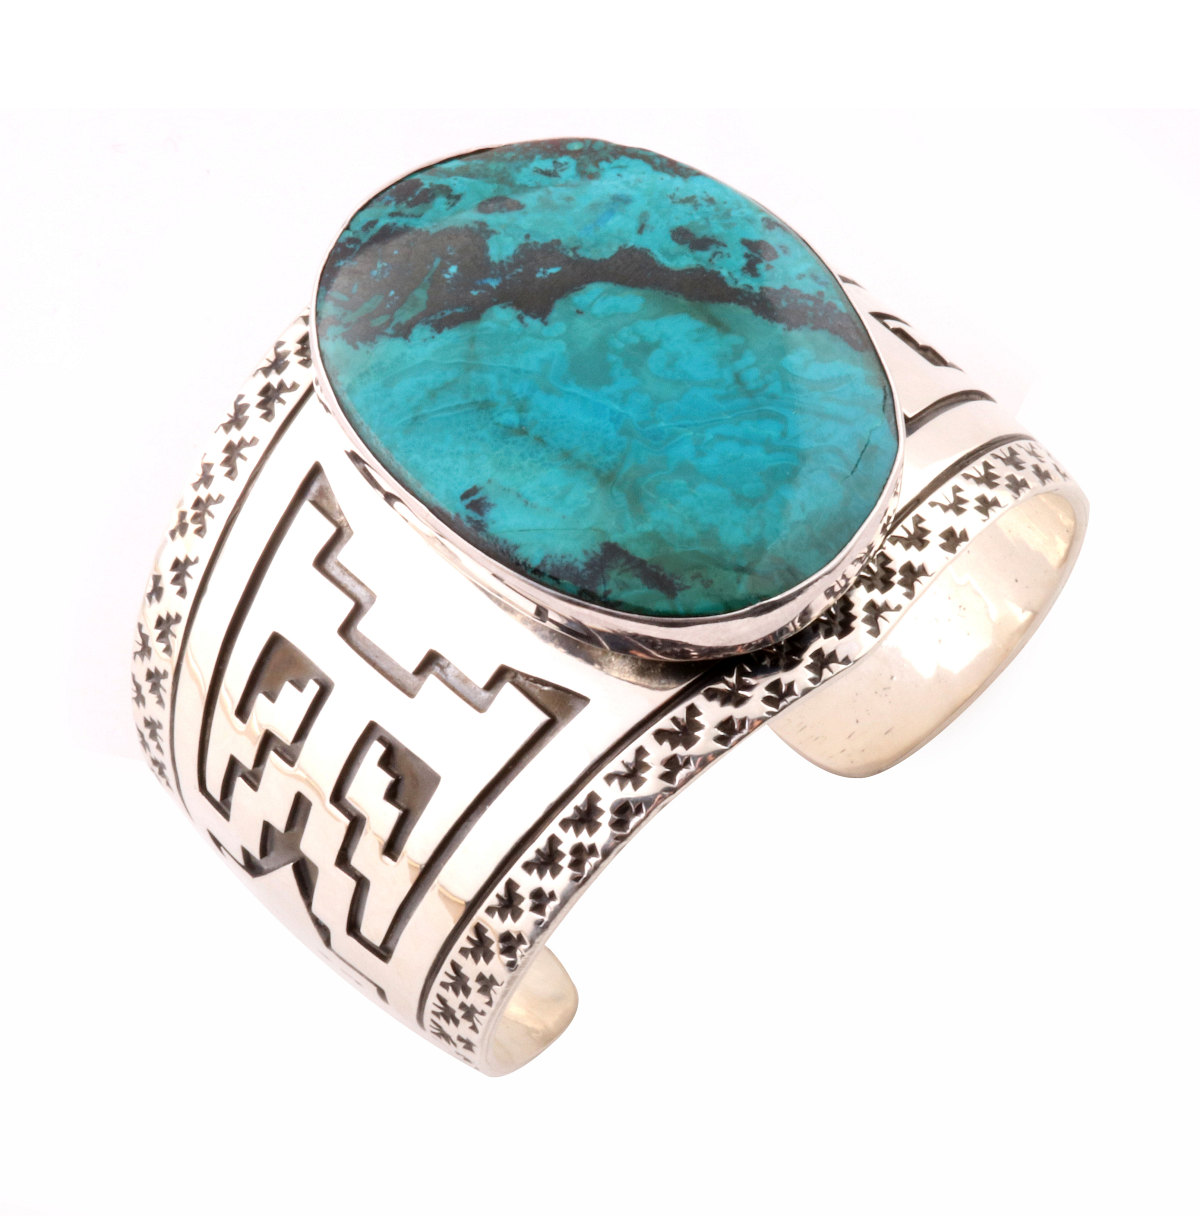 A NAVAJO STERLING & TURQUOISE CUFF SIGNED E & M TELLER